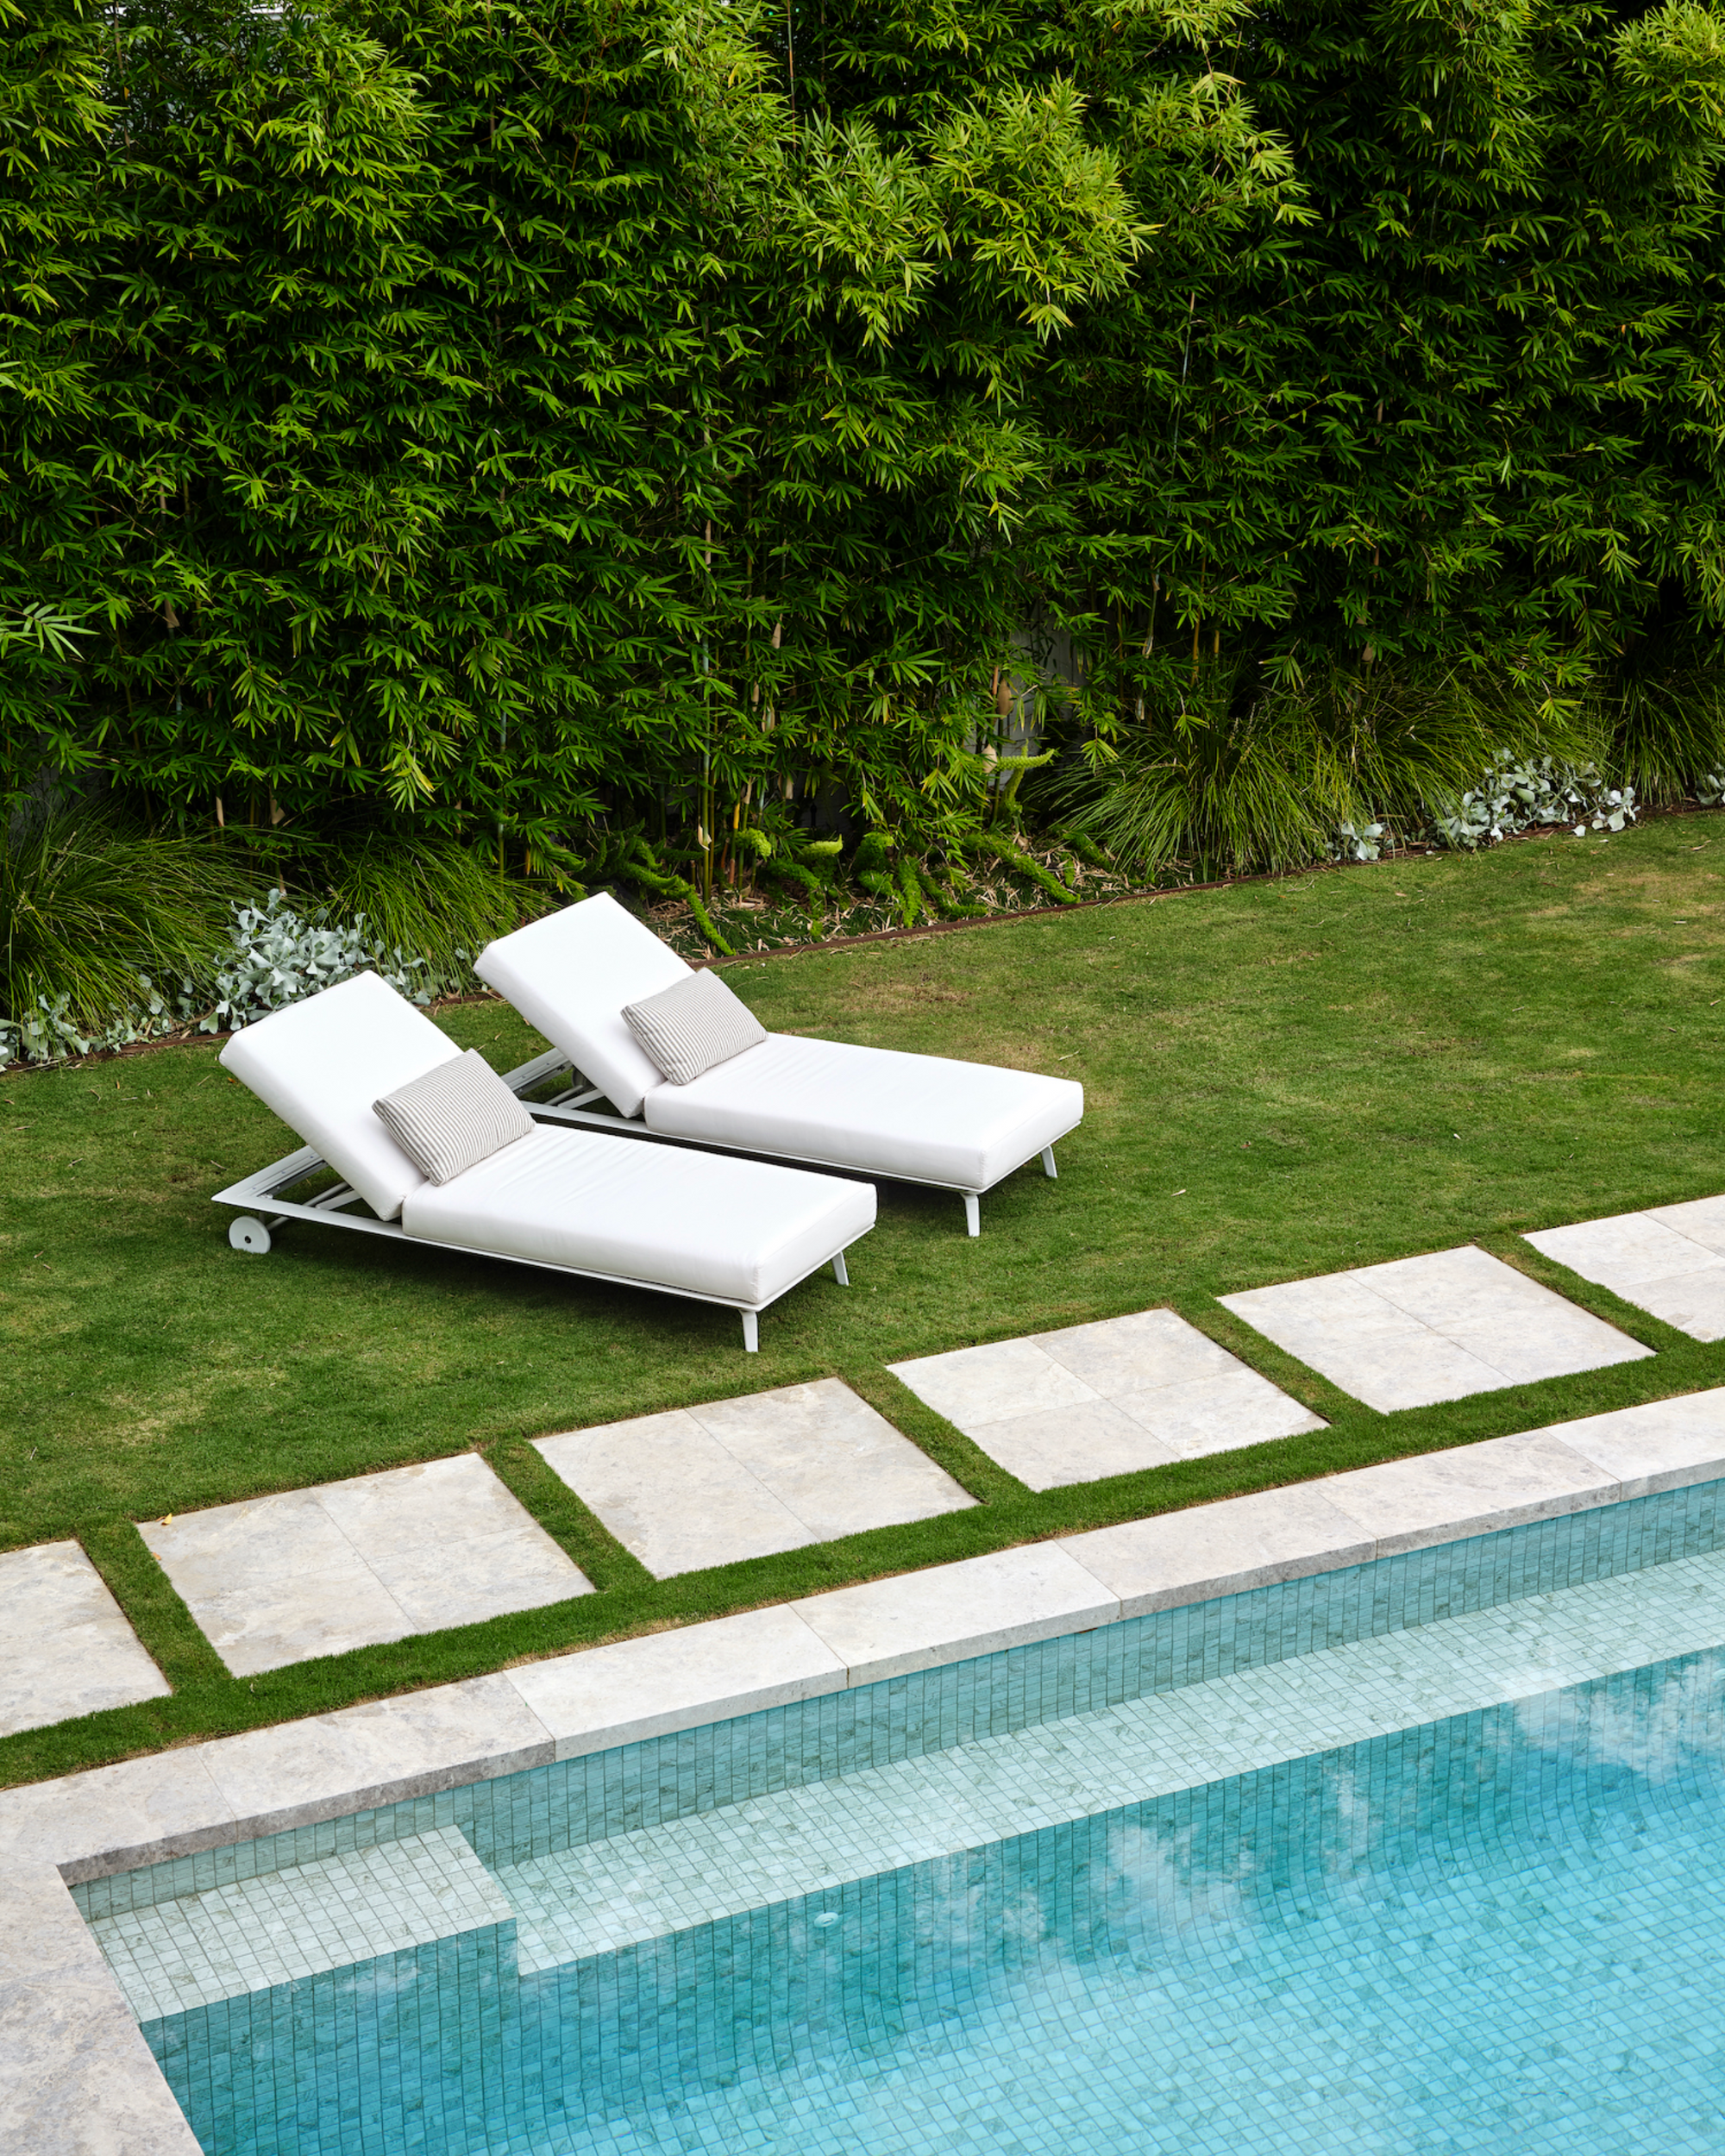 The Best Trees To Plant Poolside